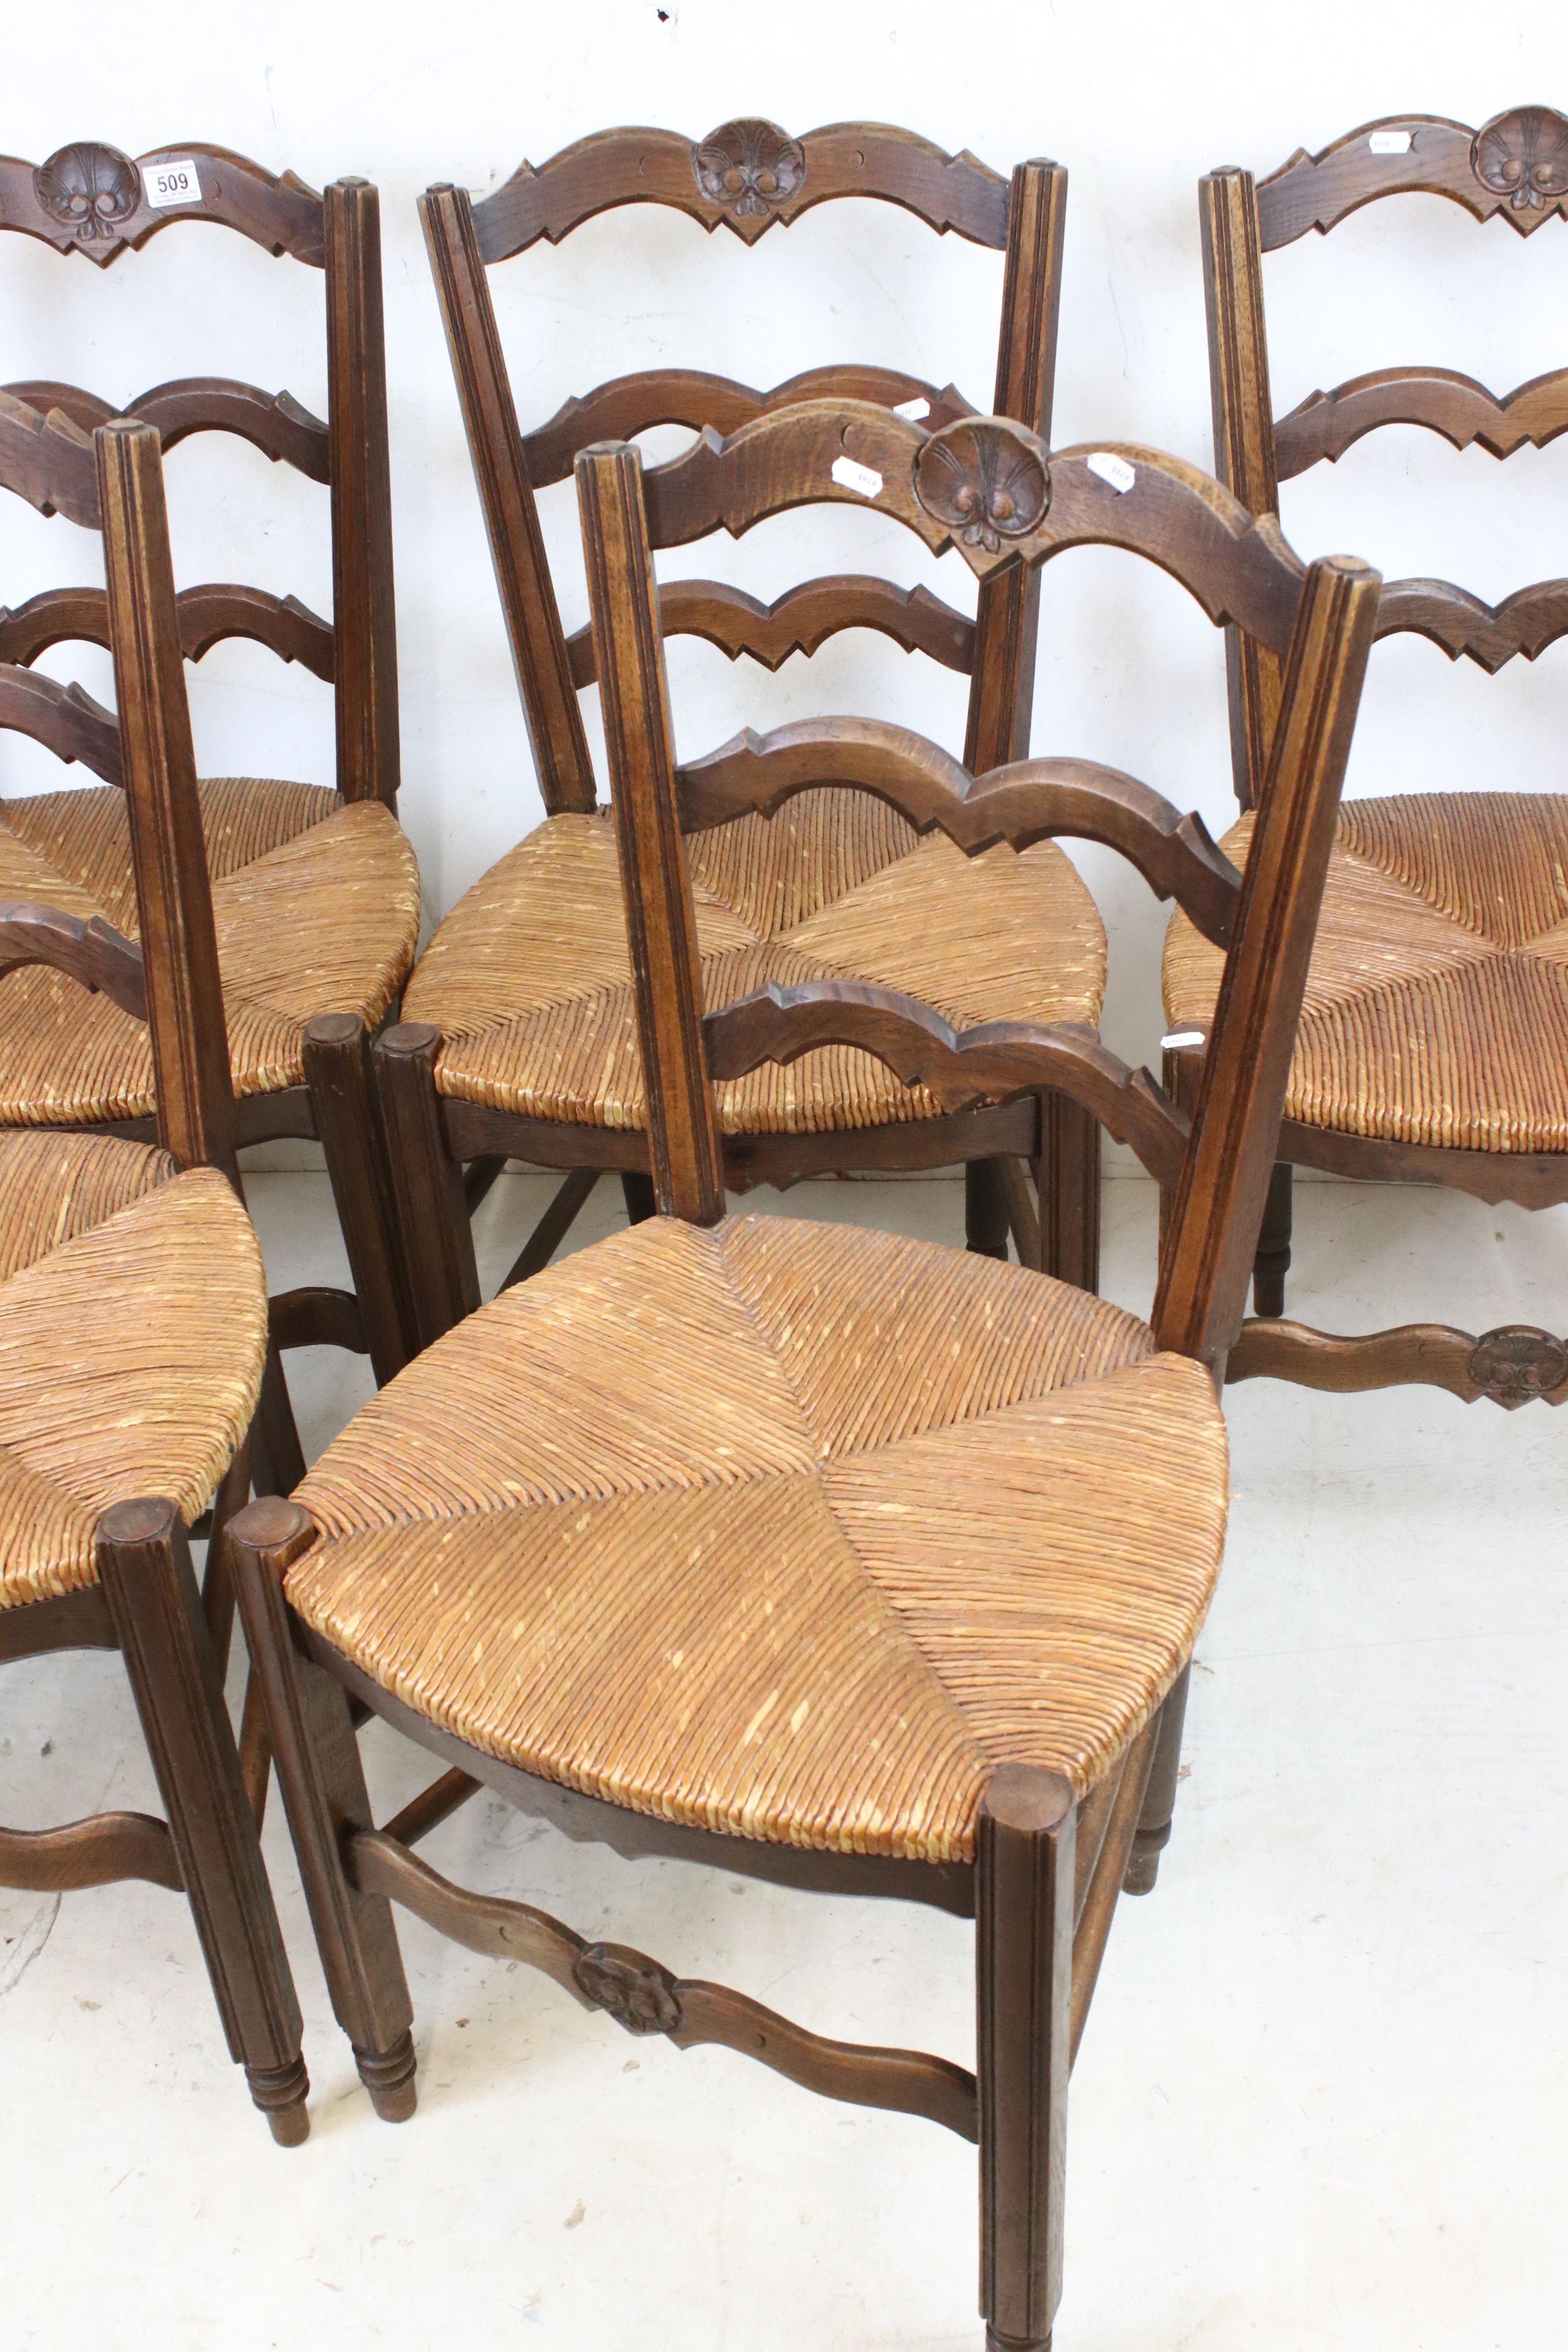 Set of Six French Oak Ladder Back Dining Chairs with rush seats, 90cm high - Image 2 of 6